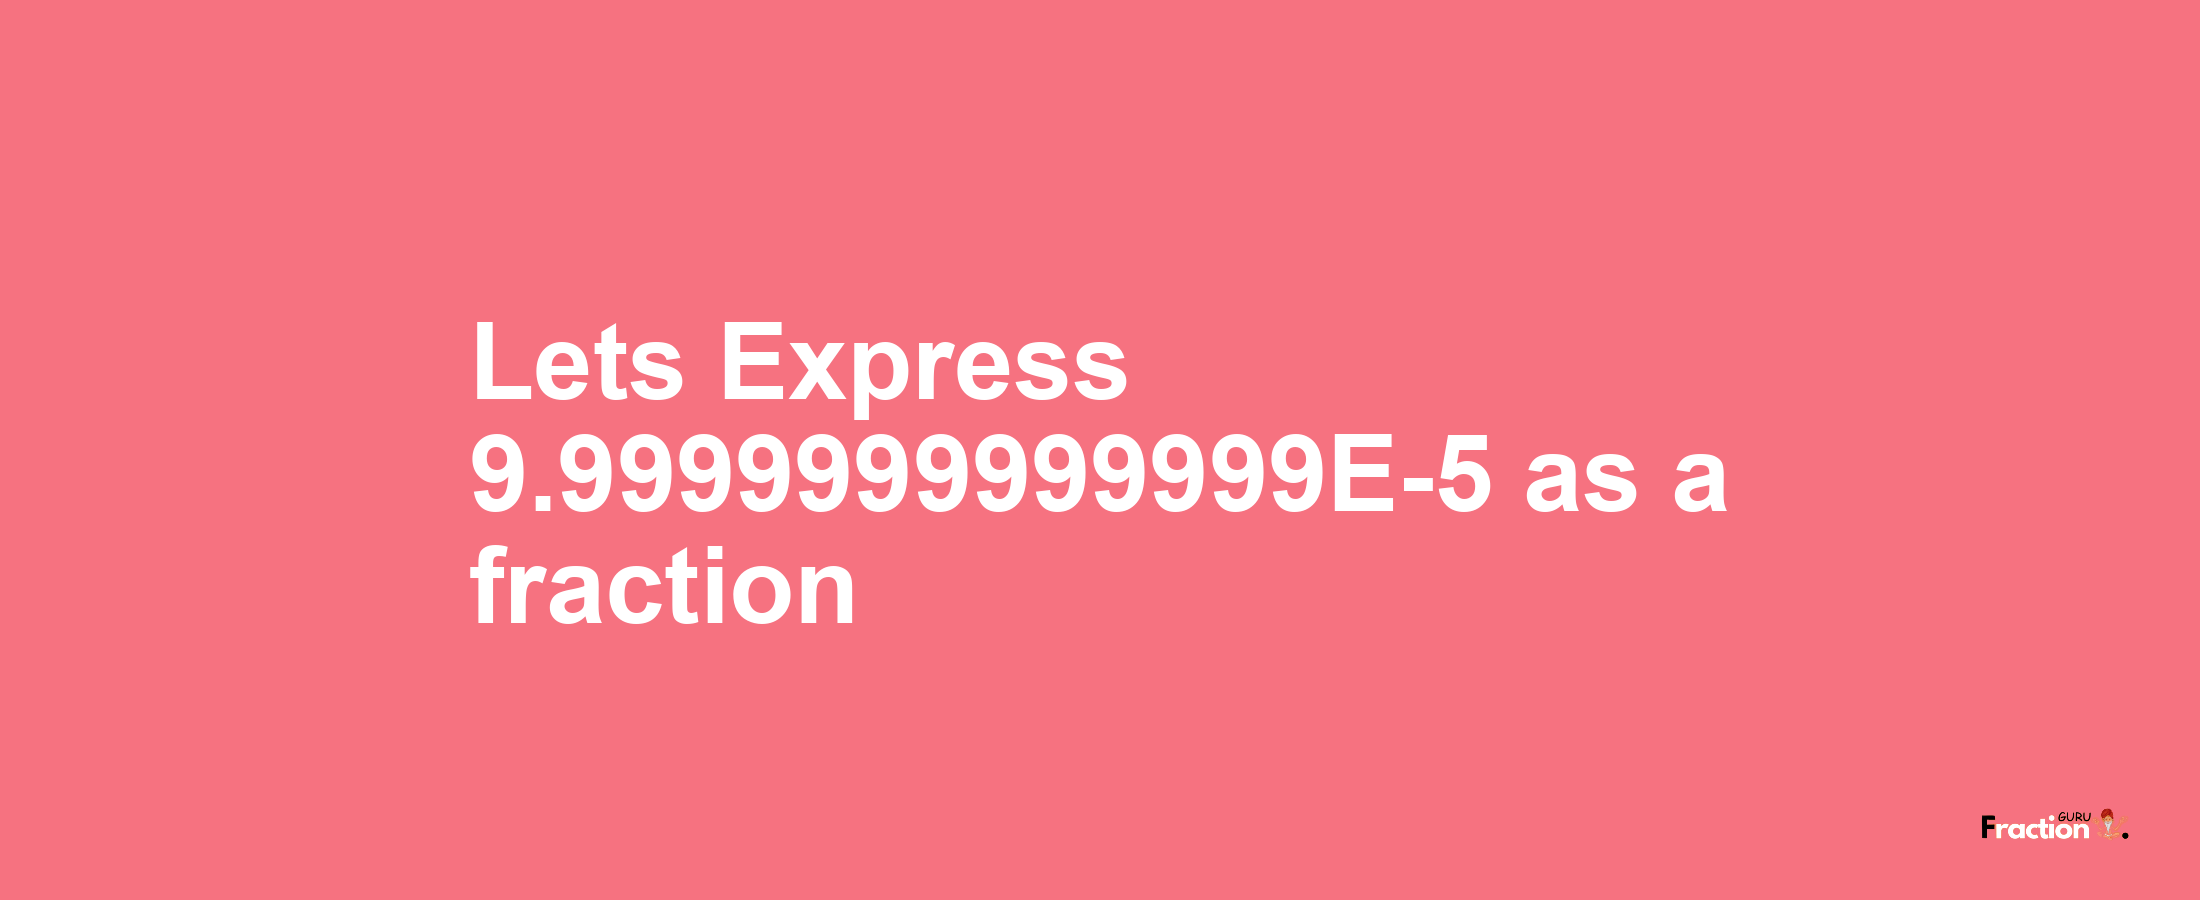 Lets Express 9.9999999999999E-5 as afraction